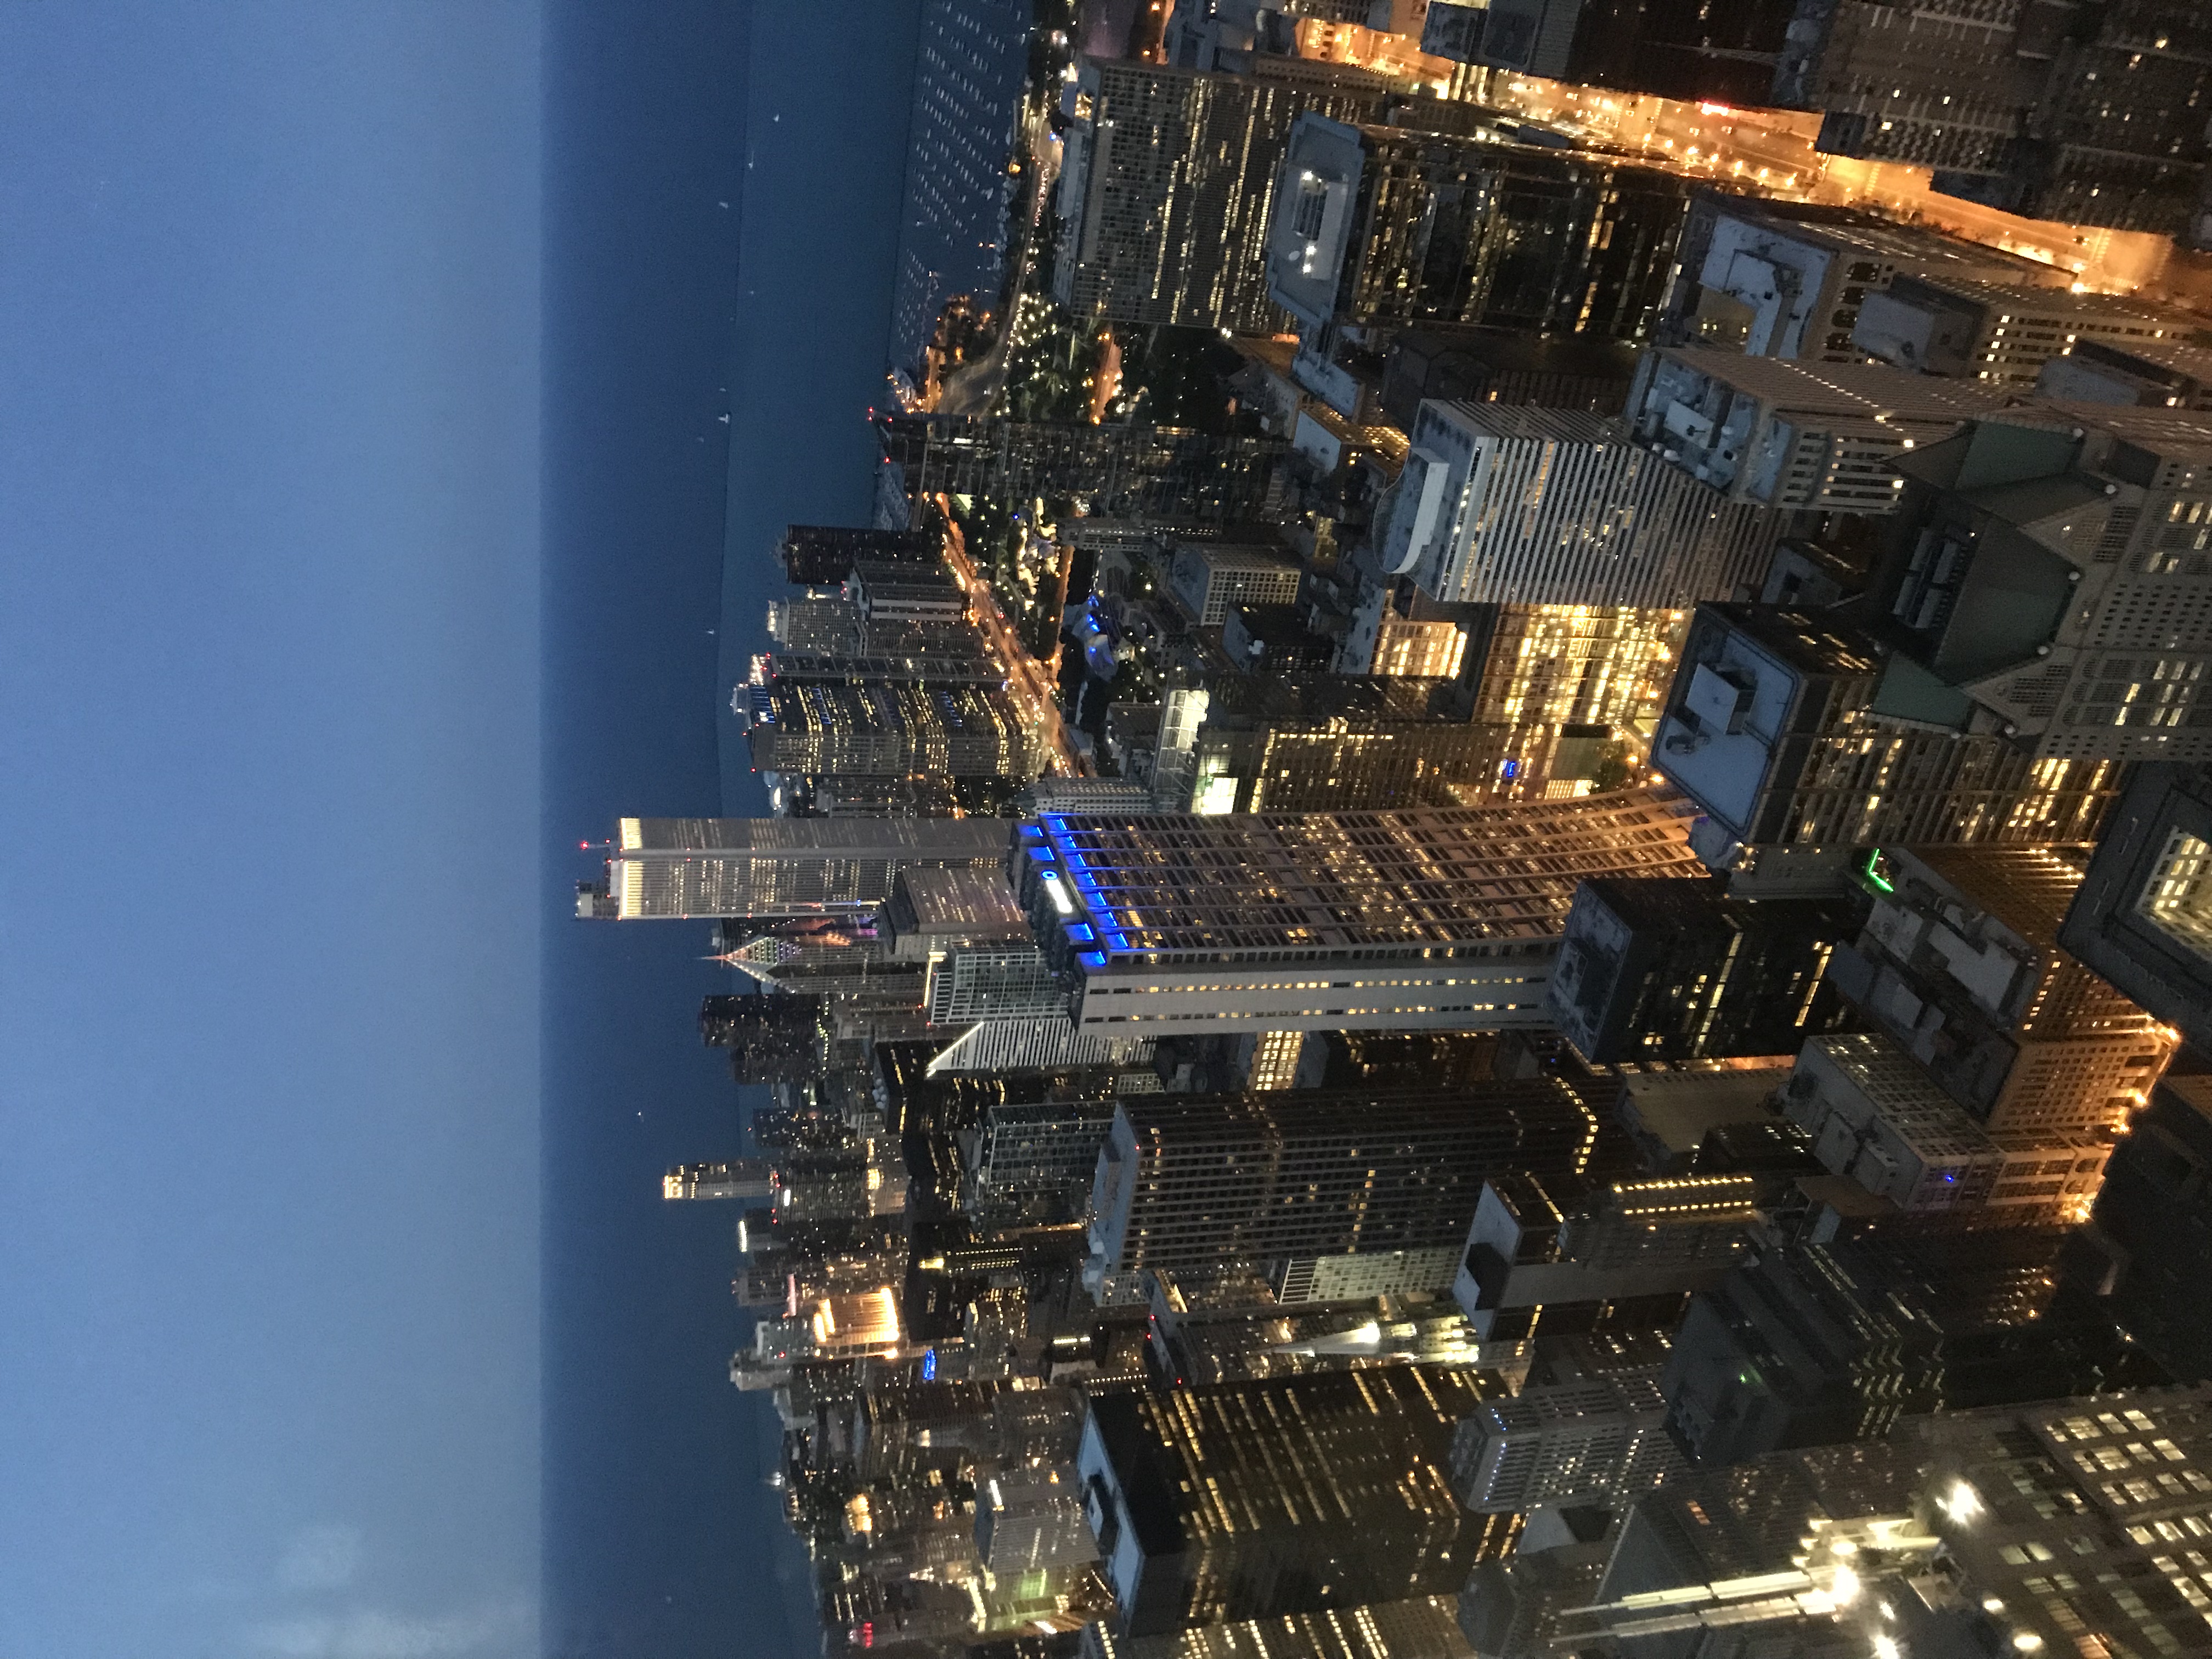 sears tower skydeck at night